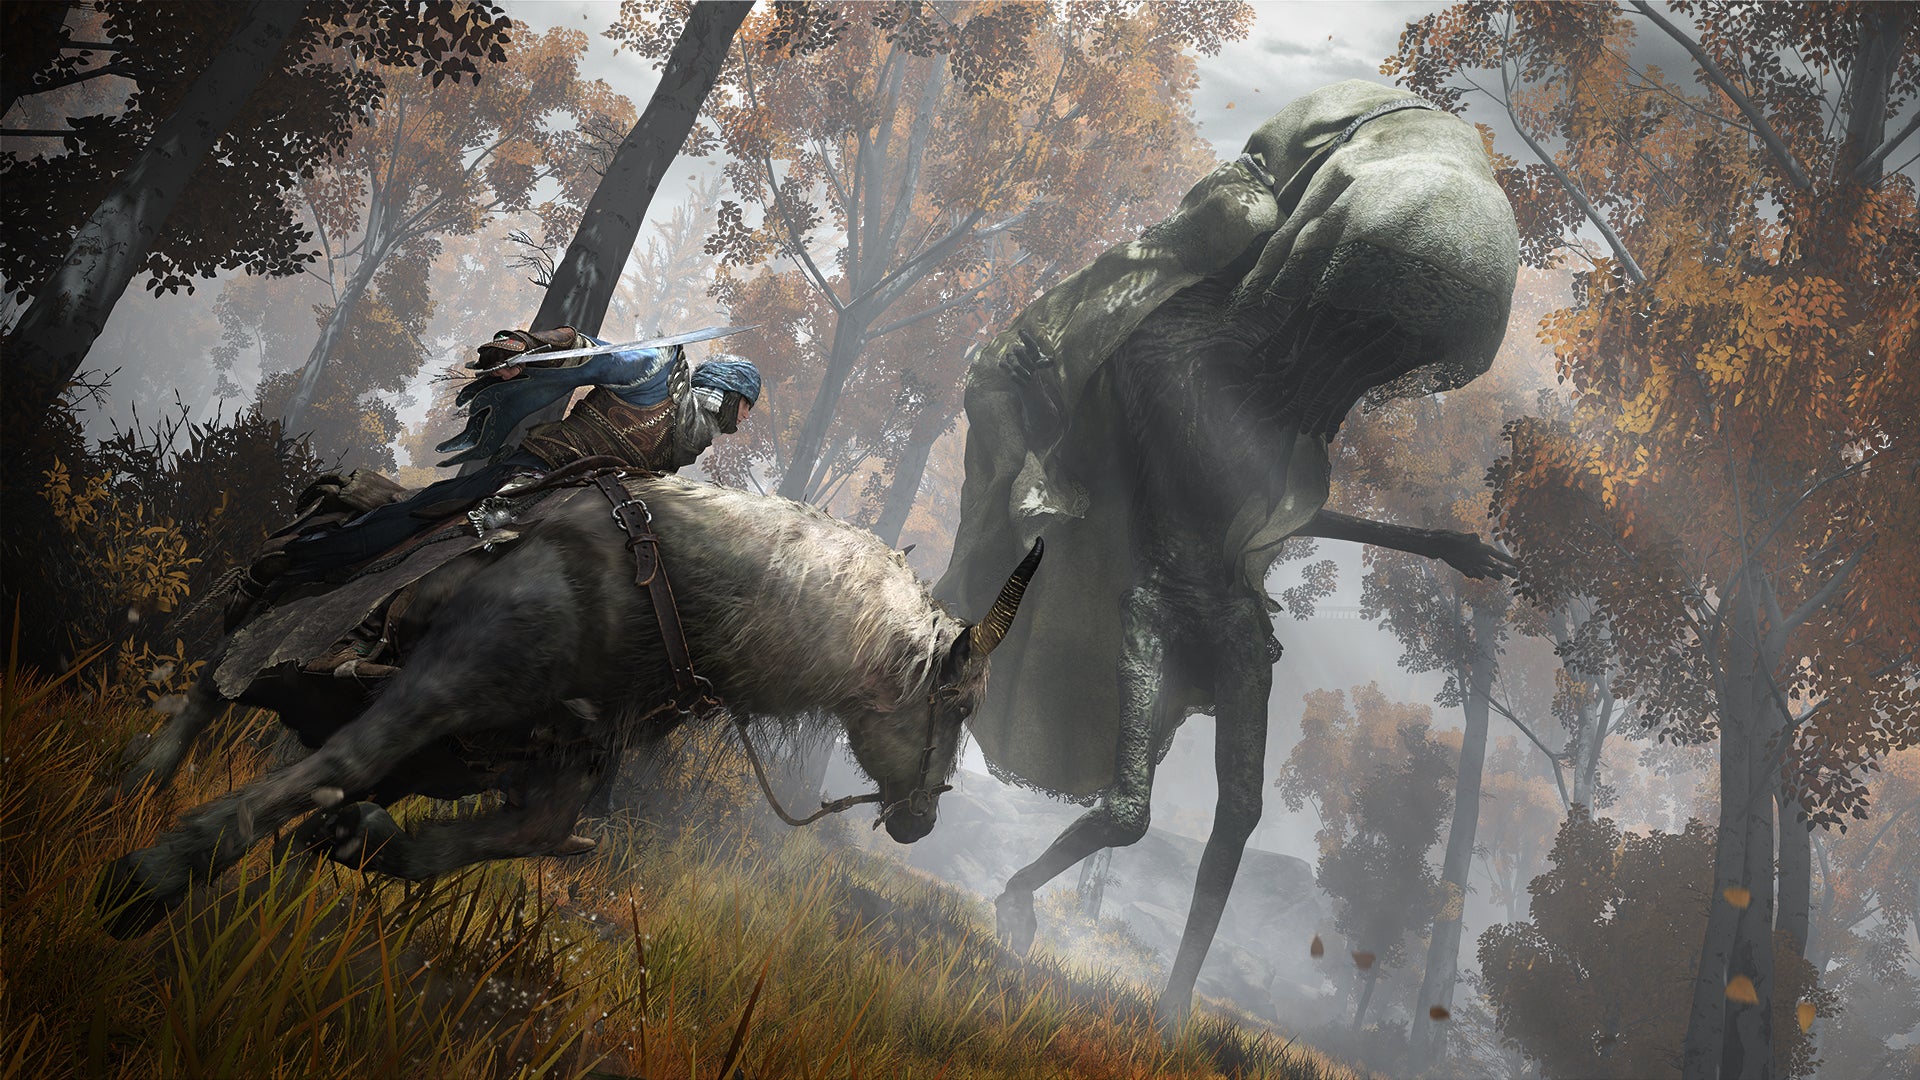 A warrior on a horse circles a giant hooded monster with tendrils pouring out from beneath their veil in an Elden Ring screenshot.